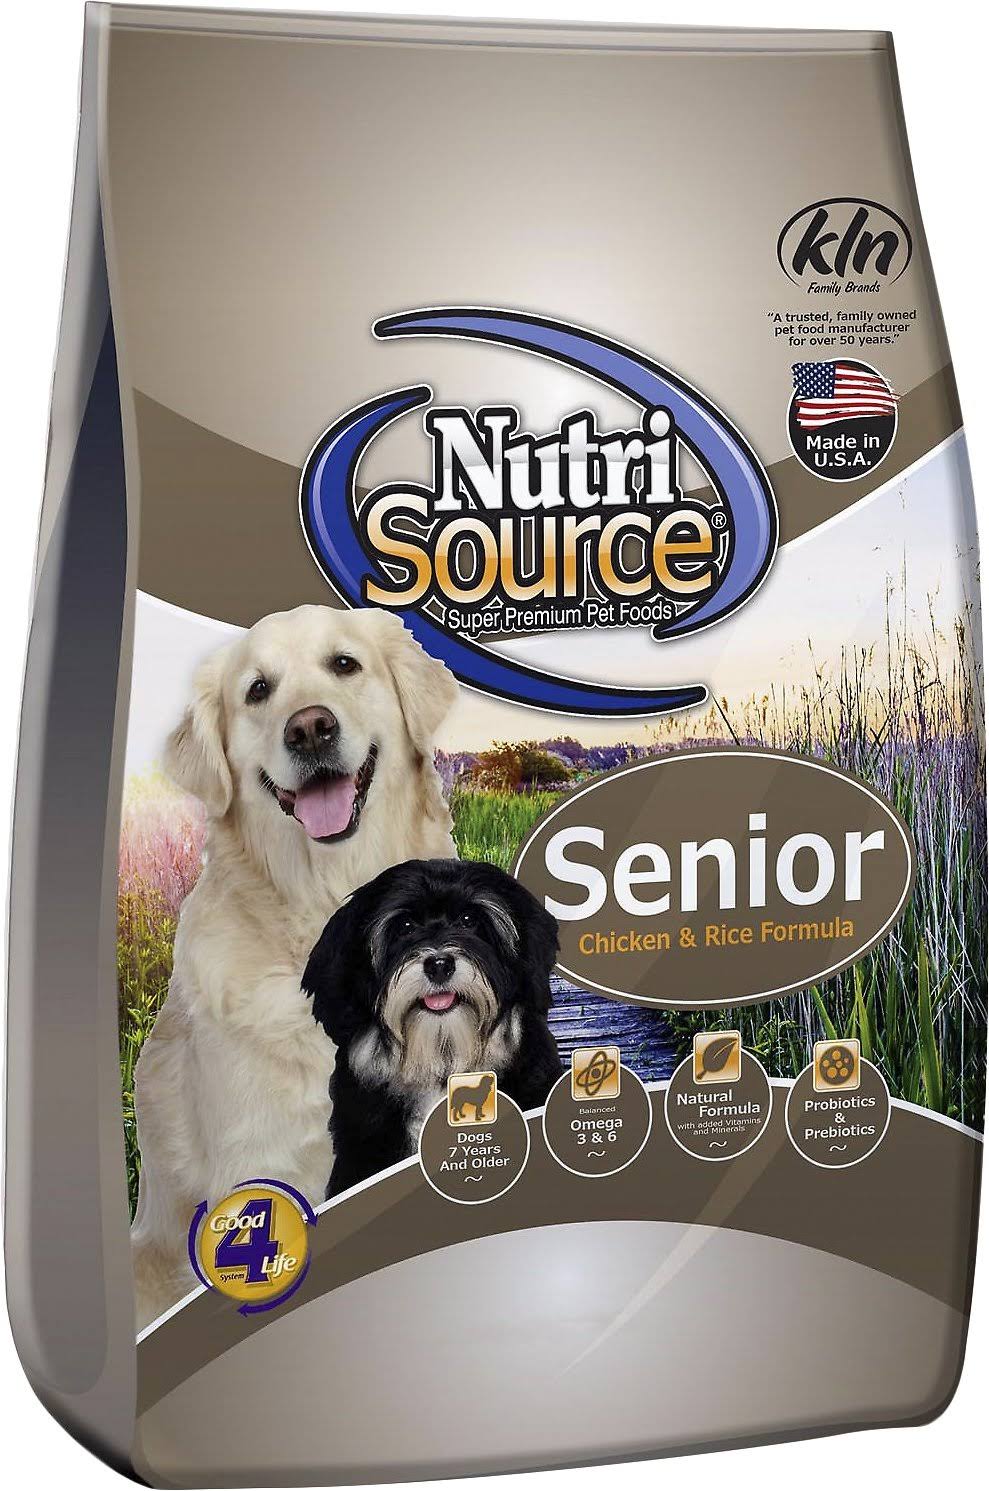 Nutrisource Senior Dry Dog Food - Chicken and Rice Formula, 30lbs